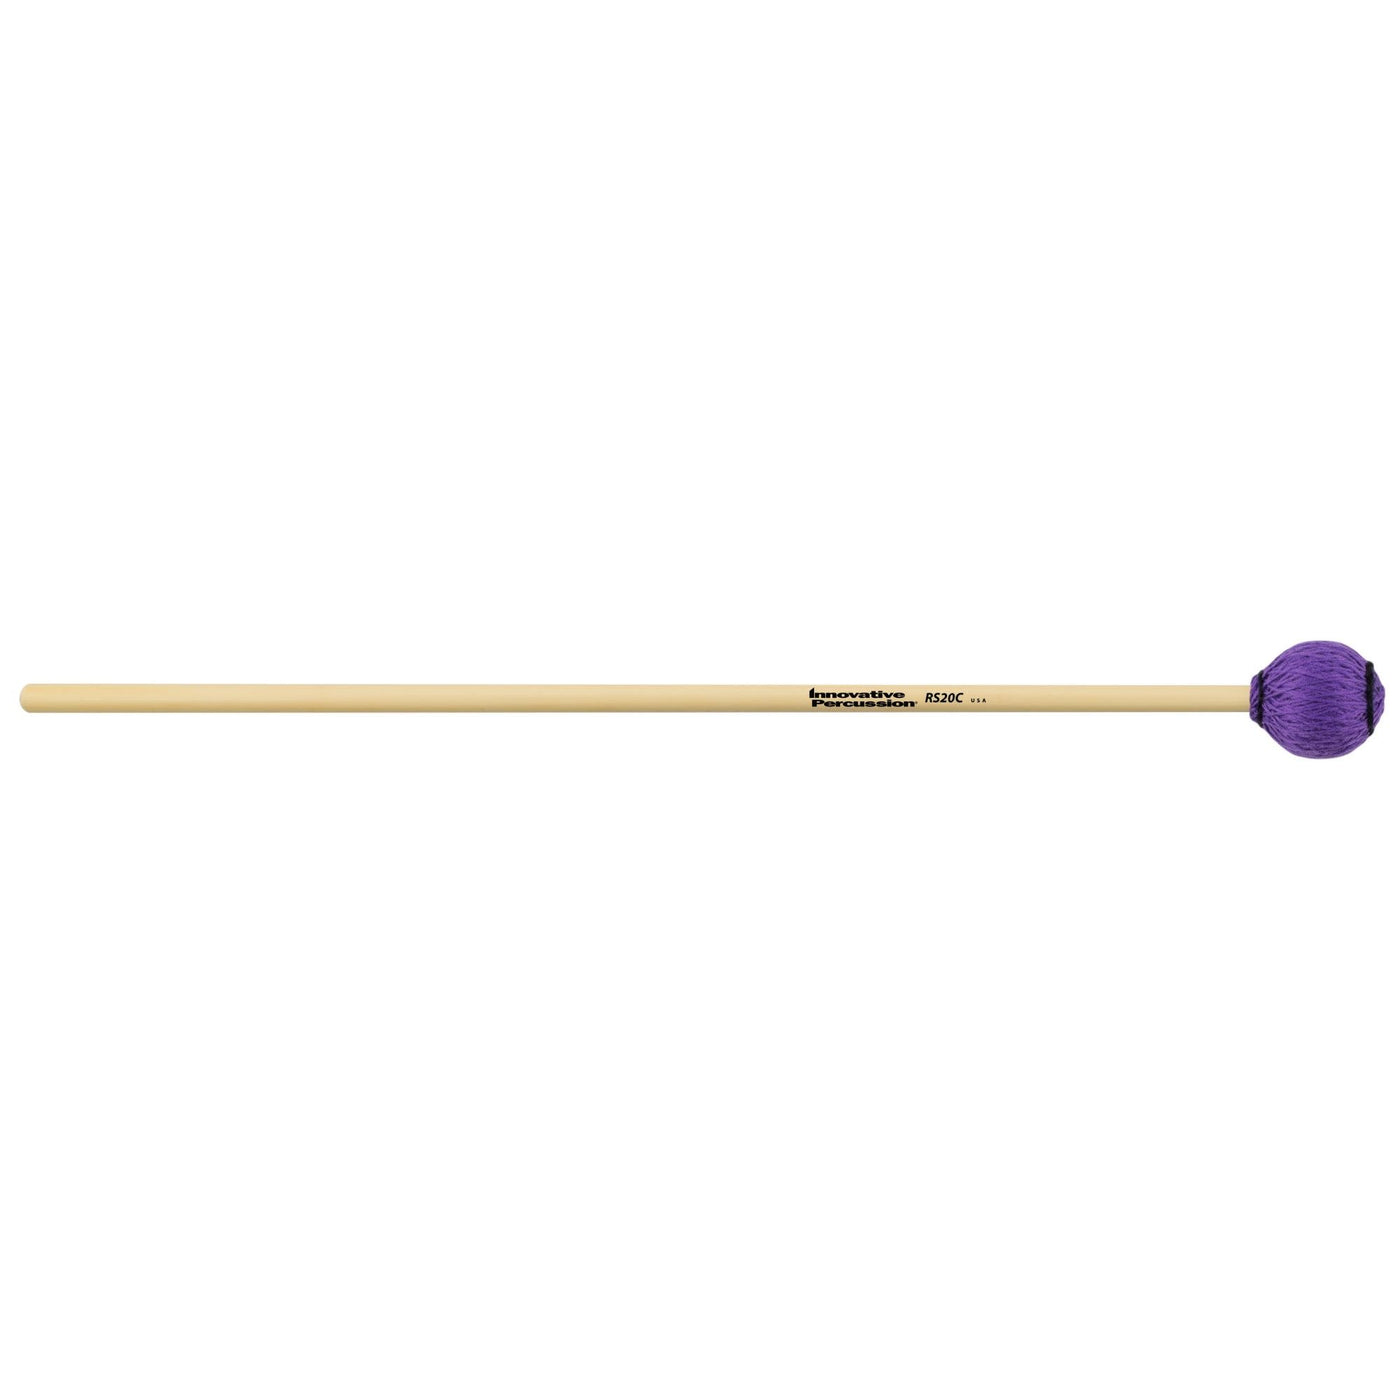 Innovative Percussion RS20C Keyboard Mallet